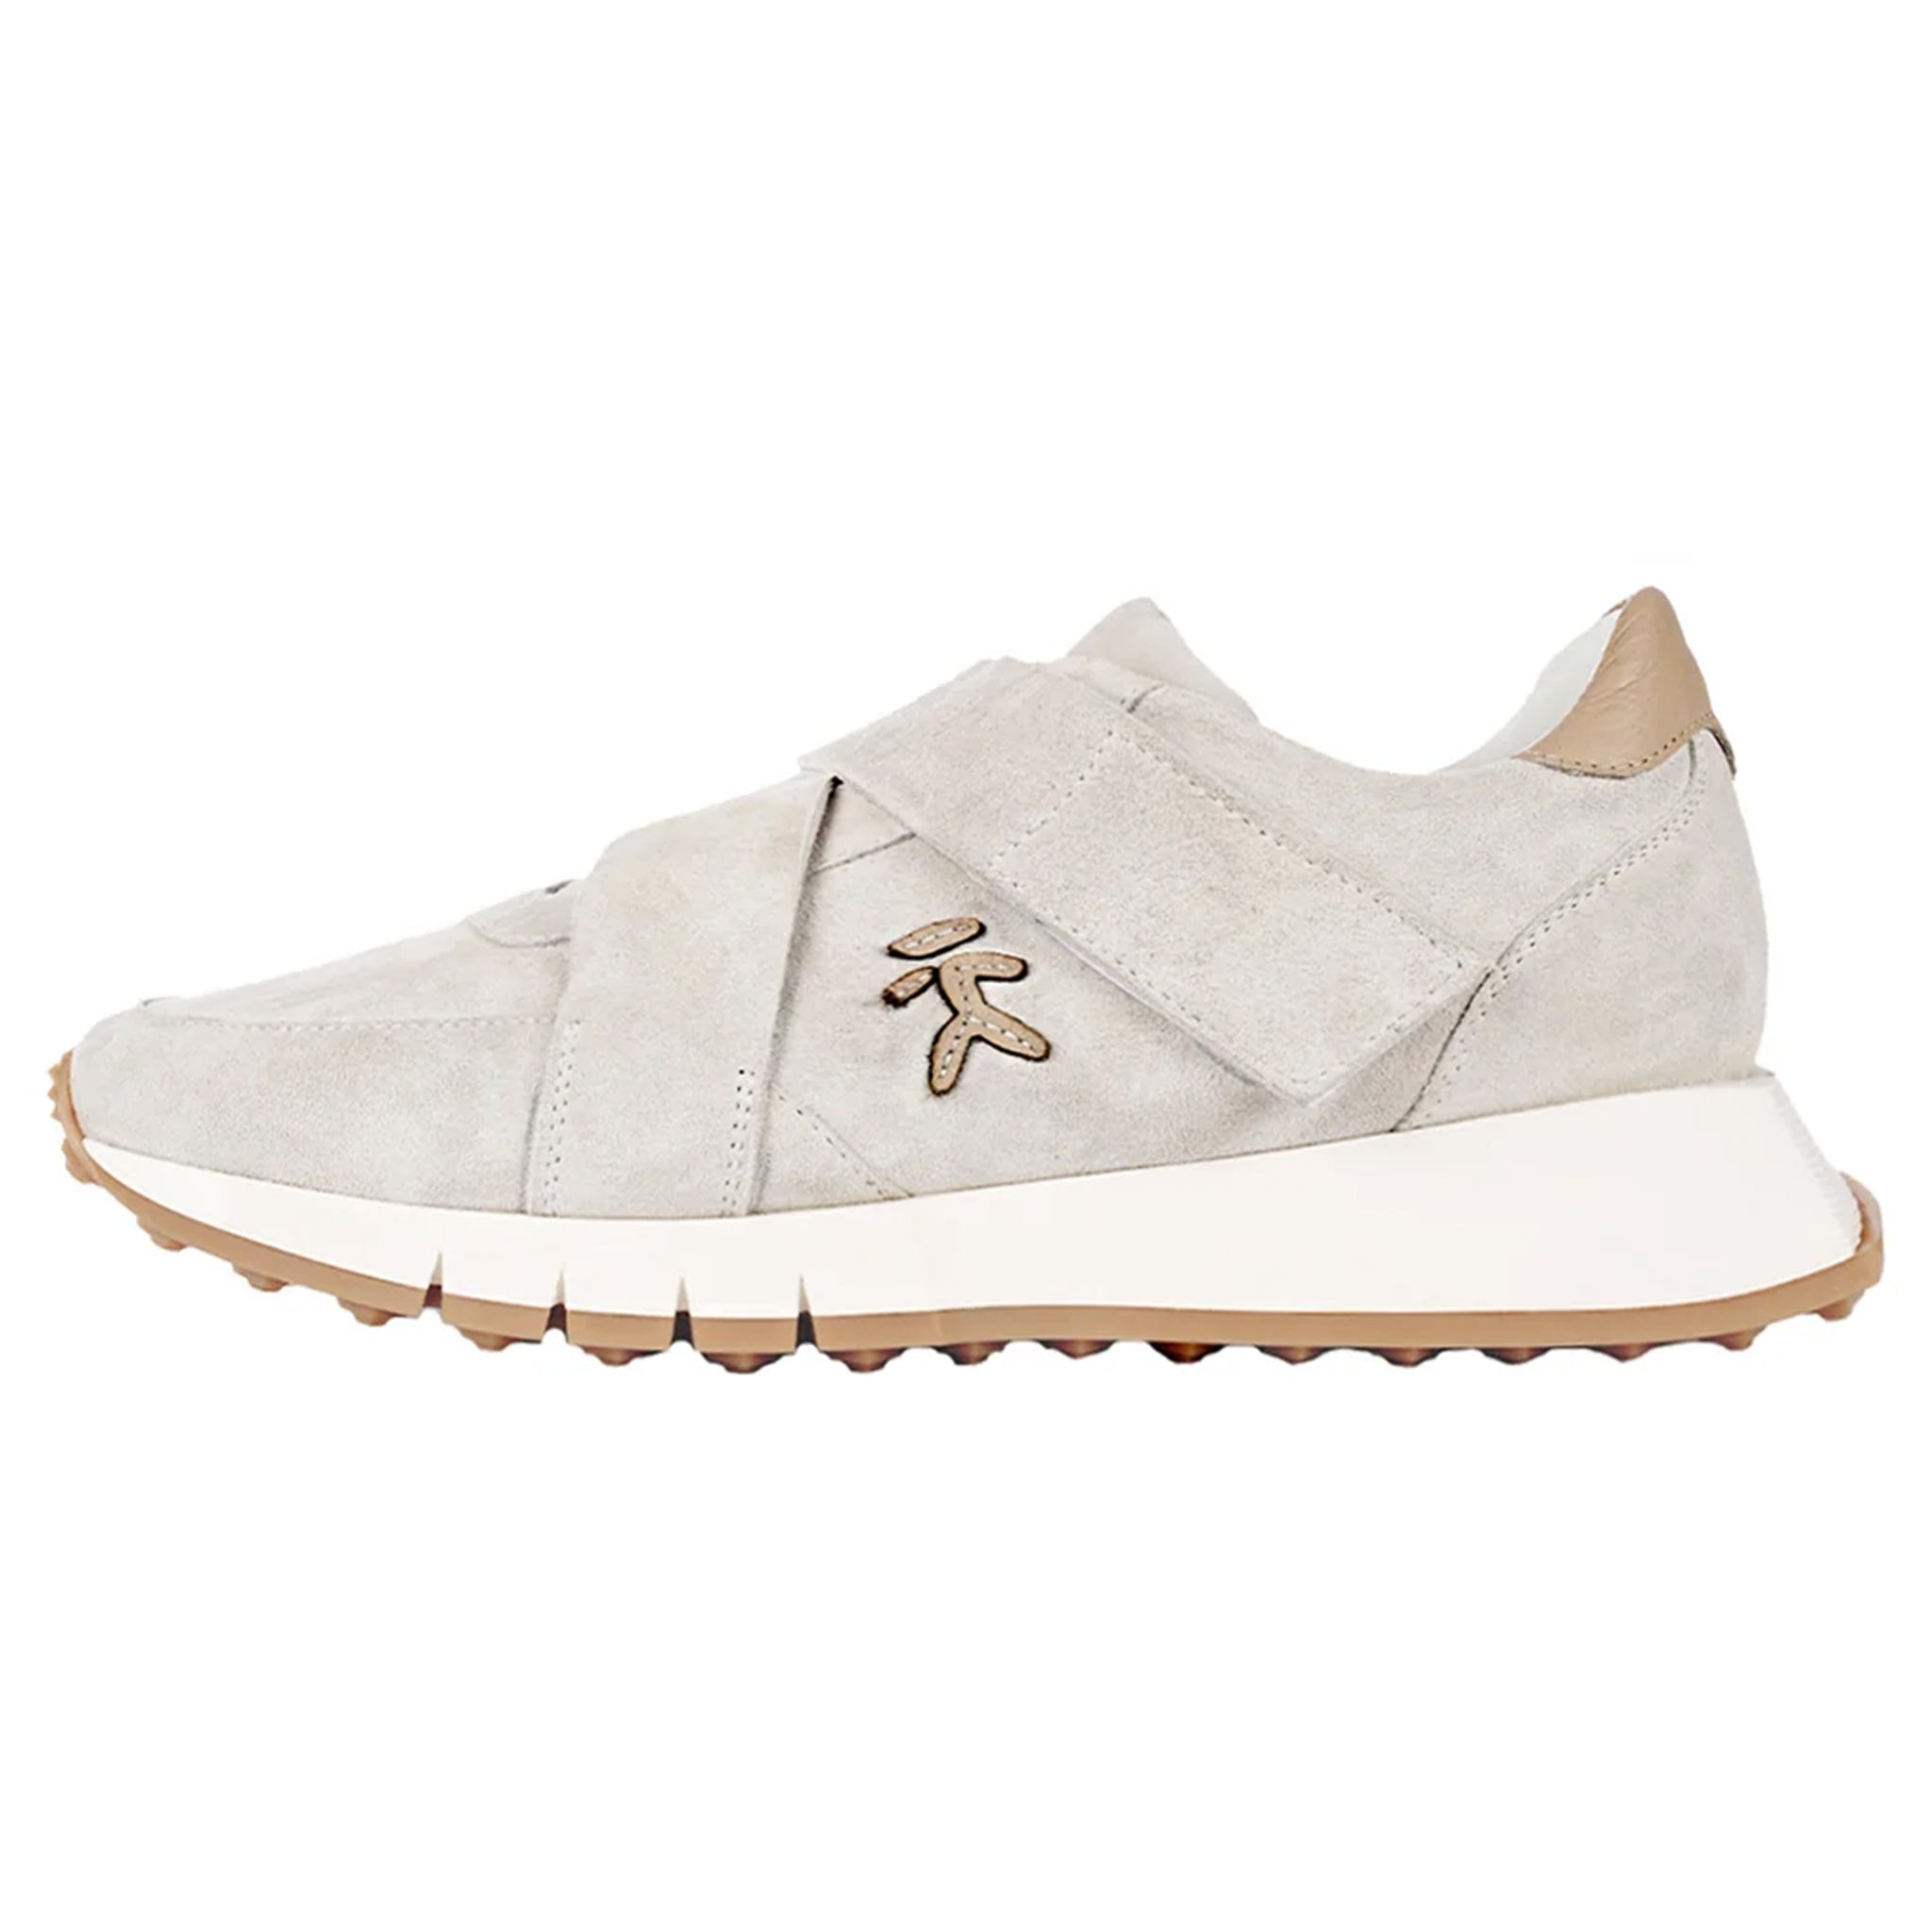 HENRY BEGUELIN Leather Strappi Sneaker in Gesso